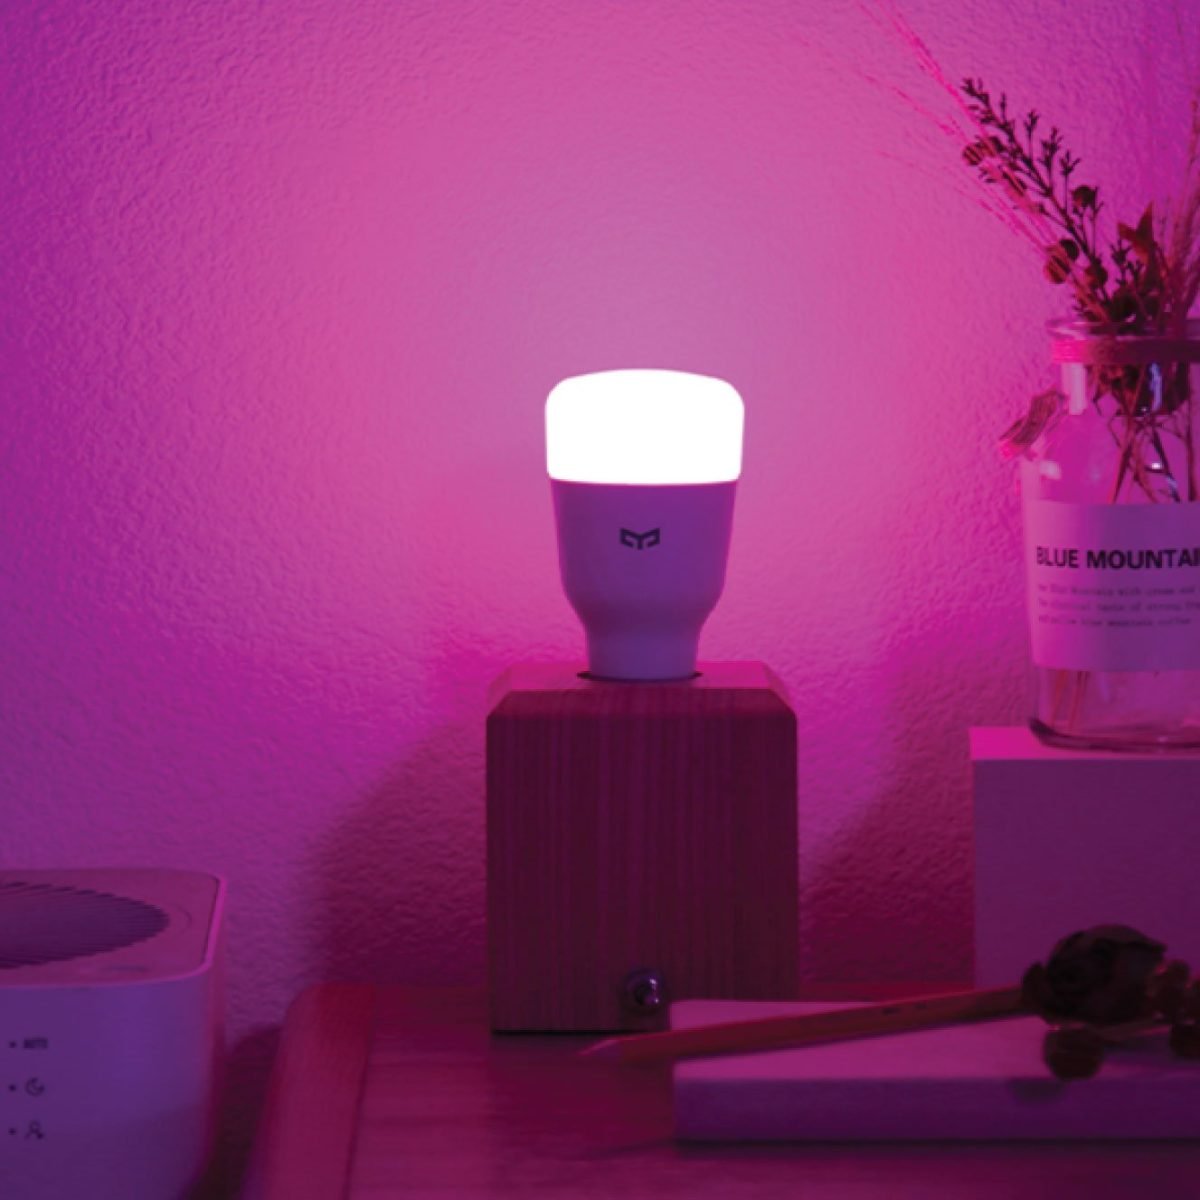 We2Asd3 Xiaomi The Yeelight 1S Rgb Smart Light Bulb Will Allow You To Create Your Own Smart Home. You Can Control It With Your Voice Or Application And Decide With What Temperature And Power It Should Shine. Luminous Flux: 800Lm Color Temperature: 1700K-6500K Lamp Holder: E27 Rated Power: 8.5W &Nbsp; 16 Million Colors Wifi Enabled, Voice Control, App Control, Music Sync &Lt;Img Class=&Quot;Alignnone Wp-Image-8061 Size-Full&Quot; Src=&Quot;Https://Lablaab.com/Wp-Content/Uploads/2020/04/Bulb-27-2-Scaled.jpg&Quot; Alt=&Quot;&Quot; Width=&Quot;2560&Quot; Height=&Quot;357&Quot; /&Gt; &Nbsp; Yeelight Smart Bulb 1S (Color)